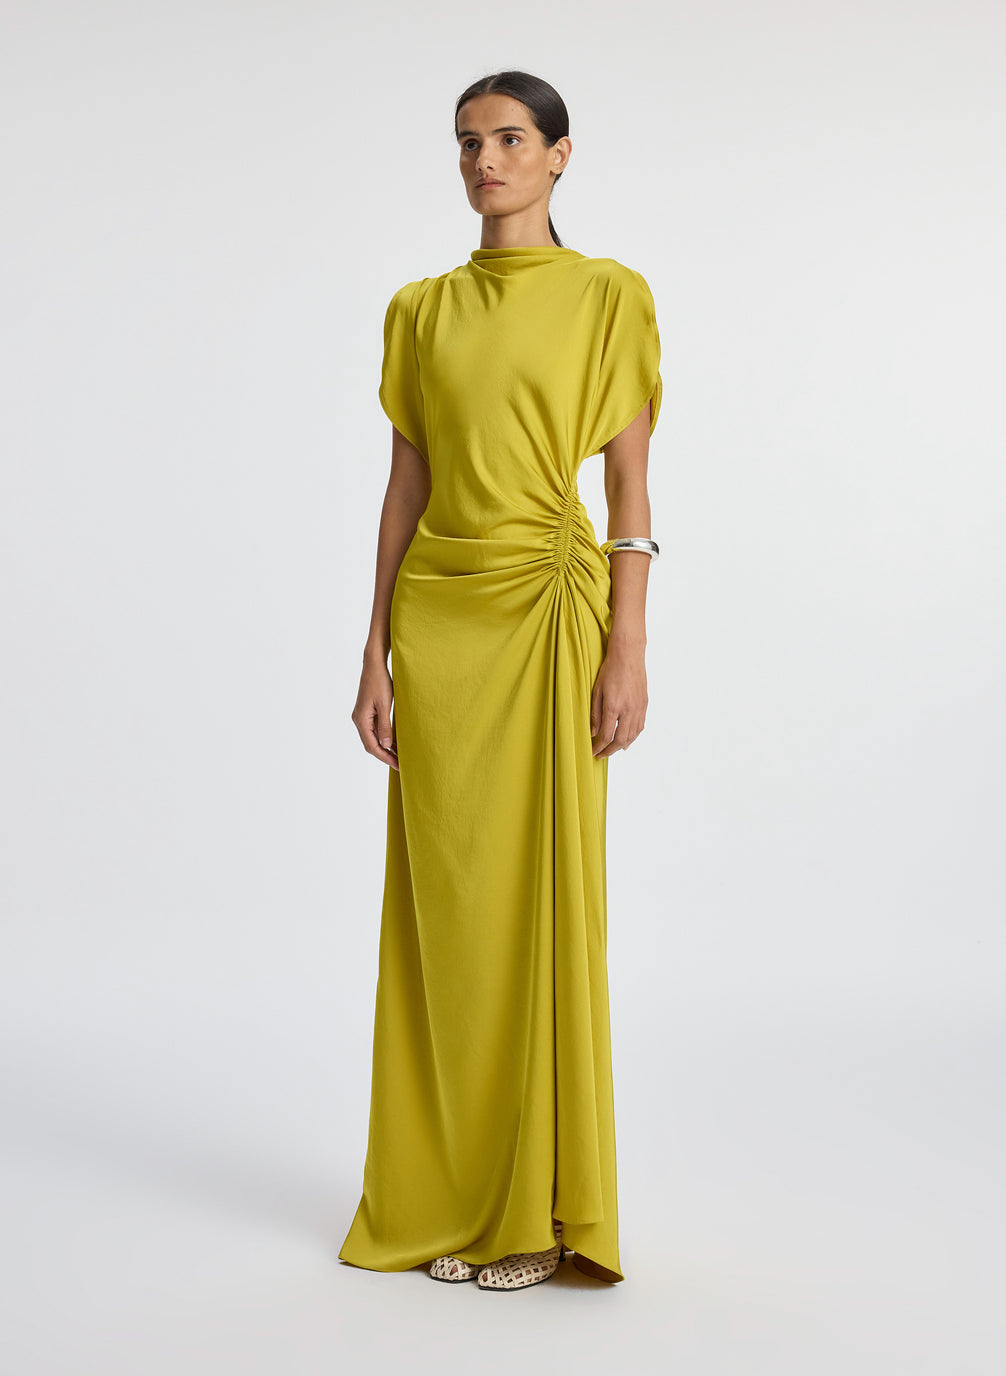 side view of woman wearing yellow satin short sleeve gown